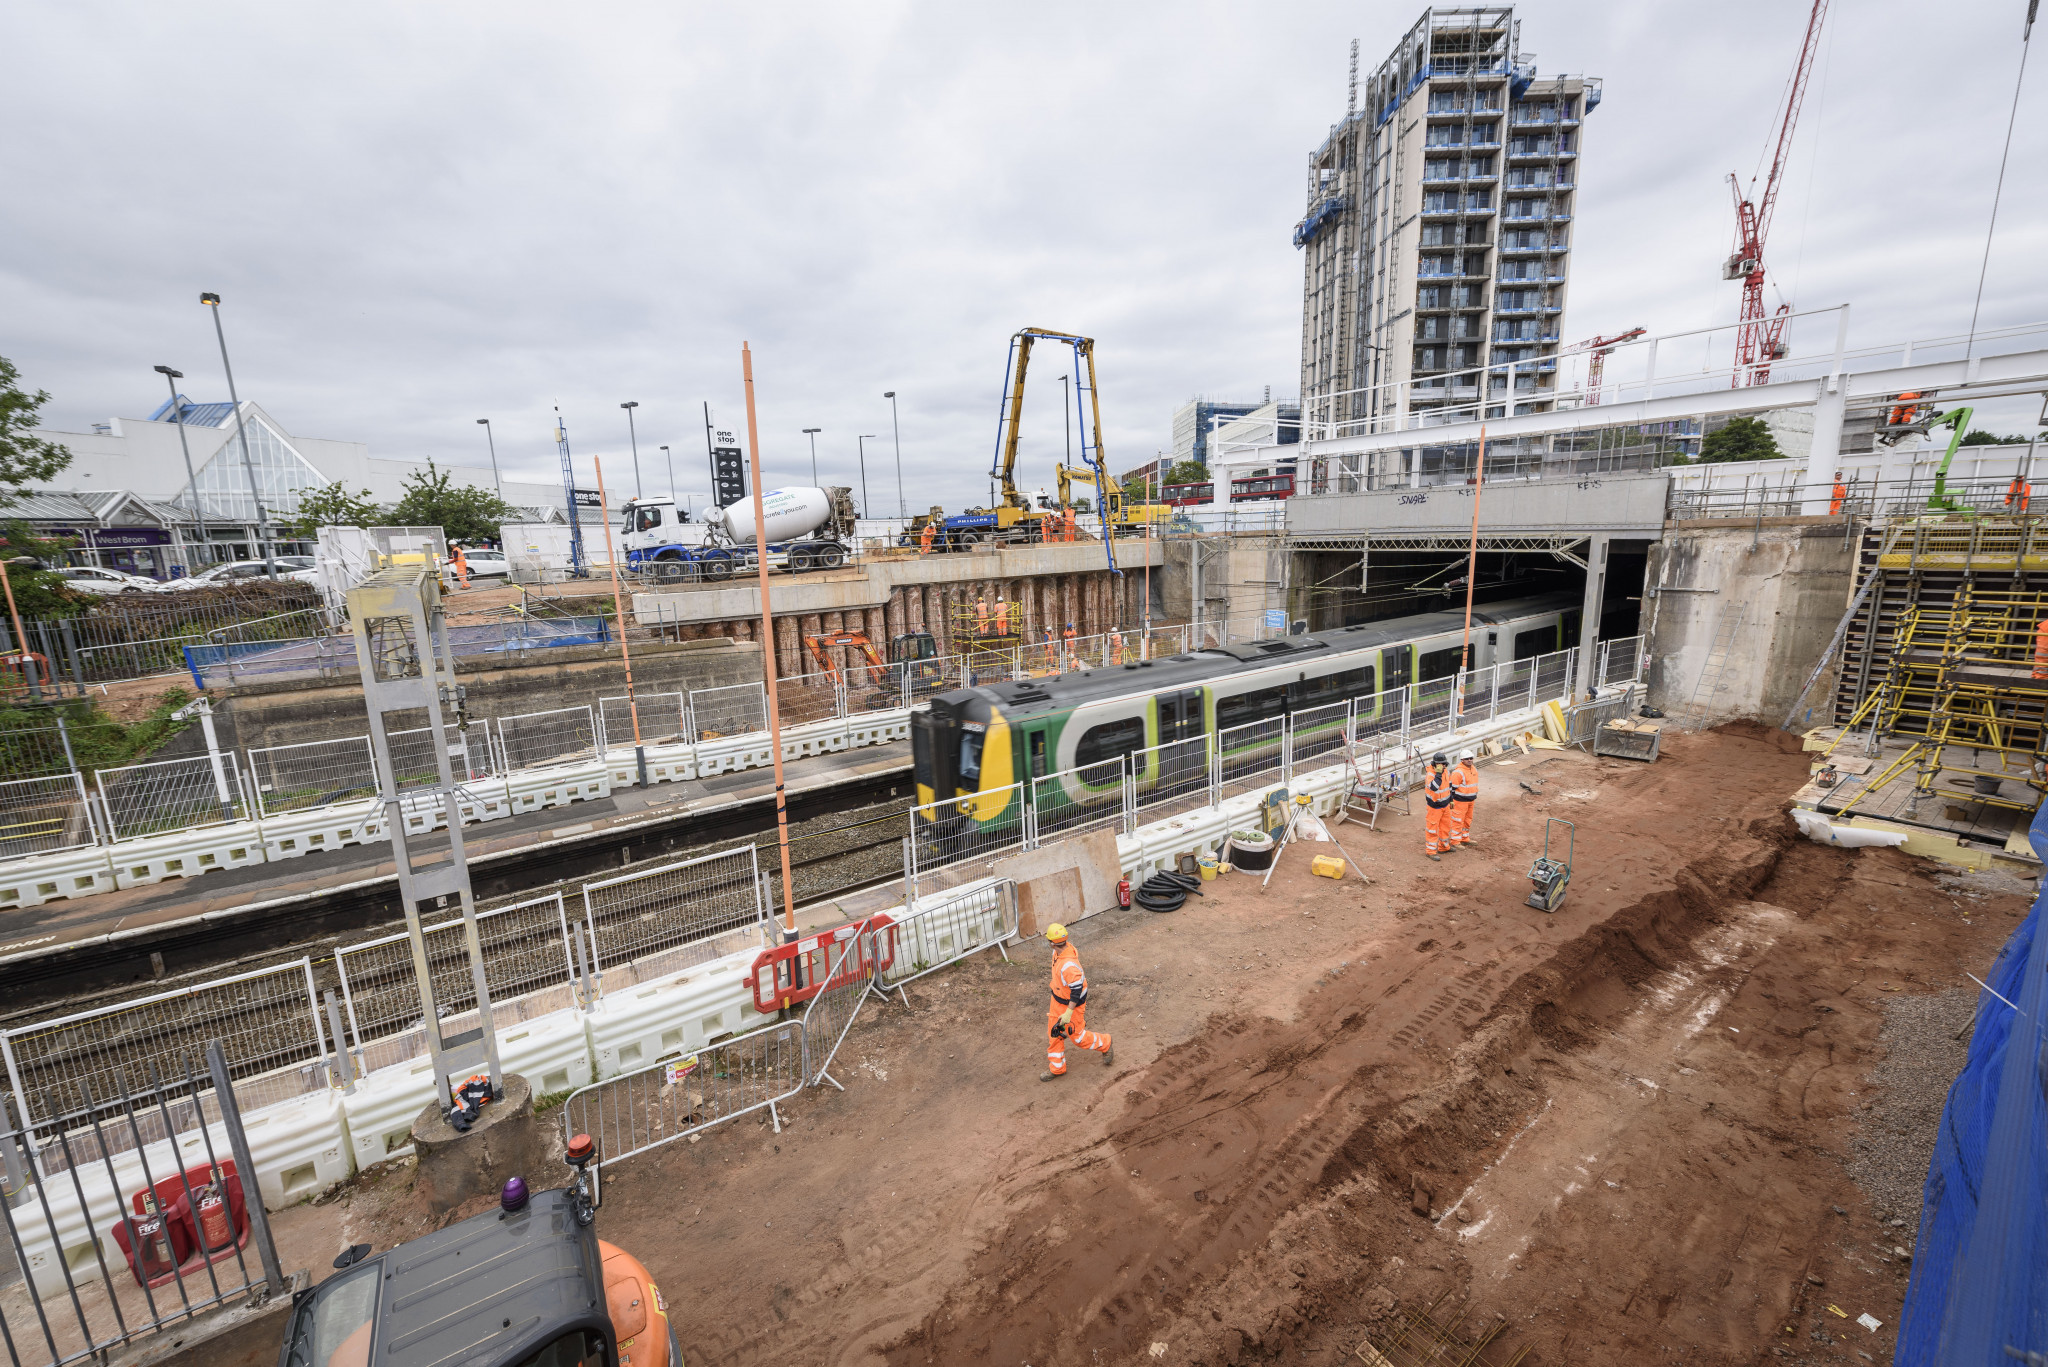 Redevelopment of Perry Barr station will include lifts and stairs to the platforms, as well as a new ticket office, toilets and changing facilities ©West Midlands Combined Authority